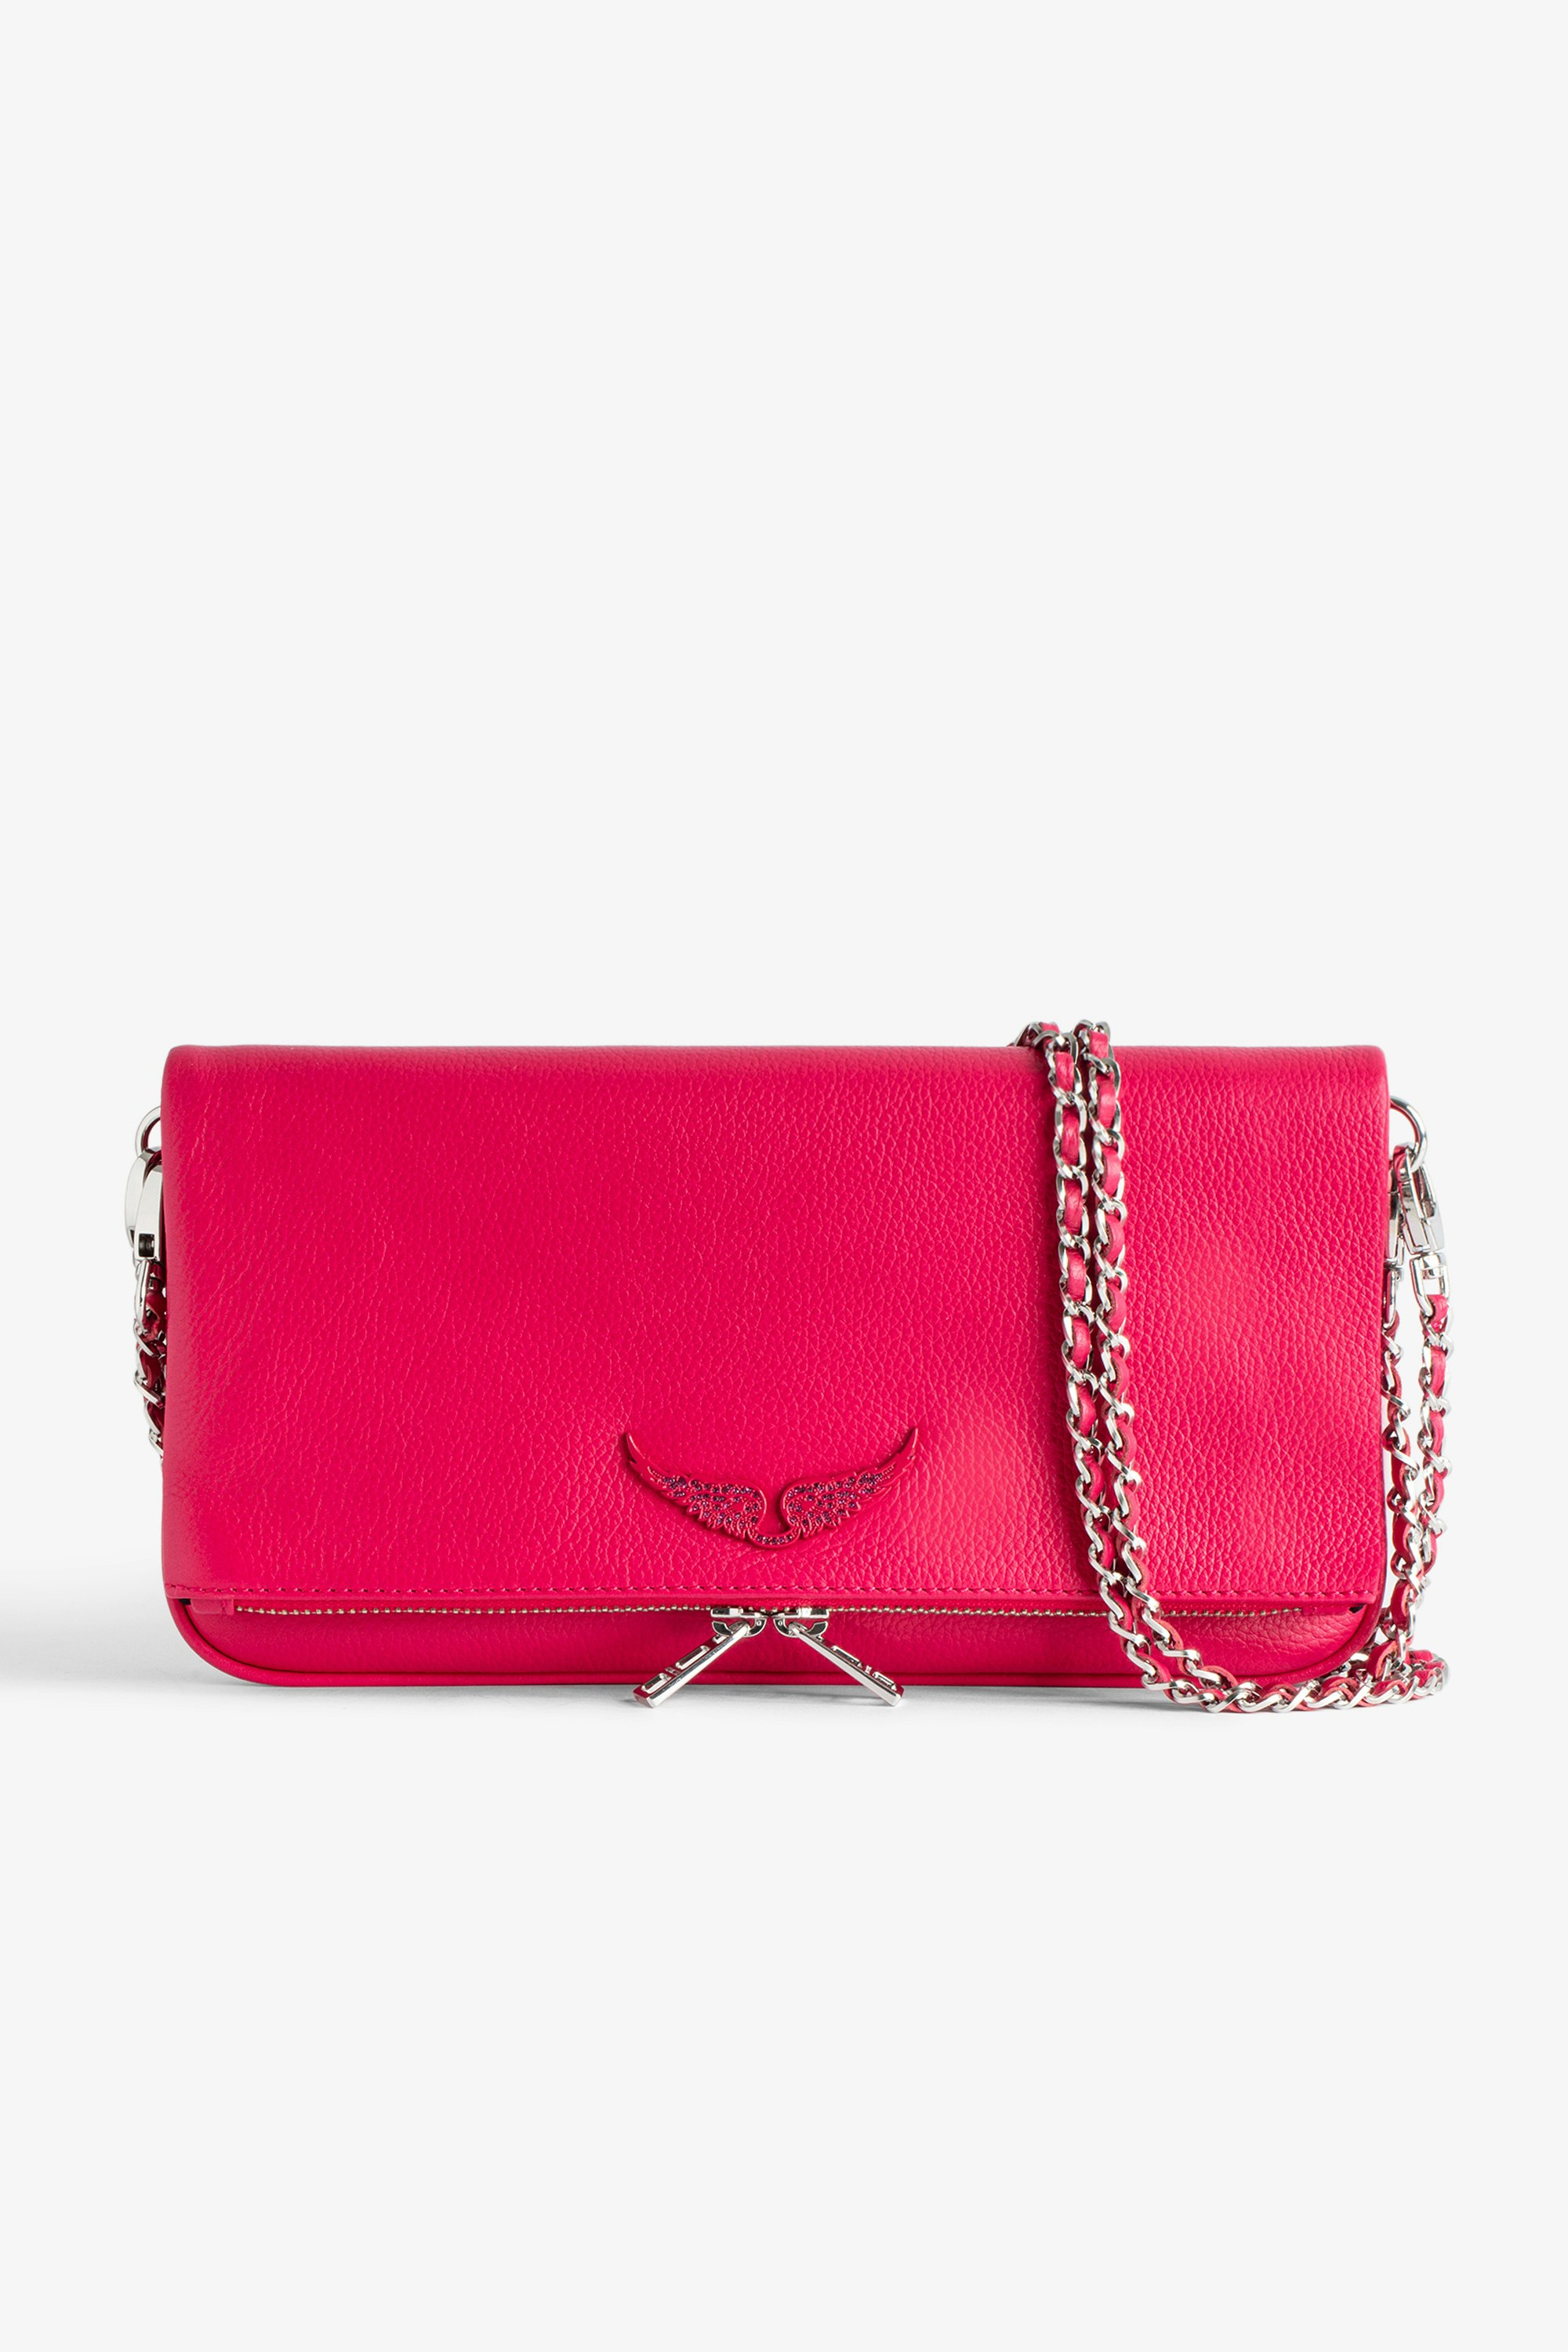 Rock Clutch Women’s pink grained leather clutch bag with double leather and metal chain strap.